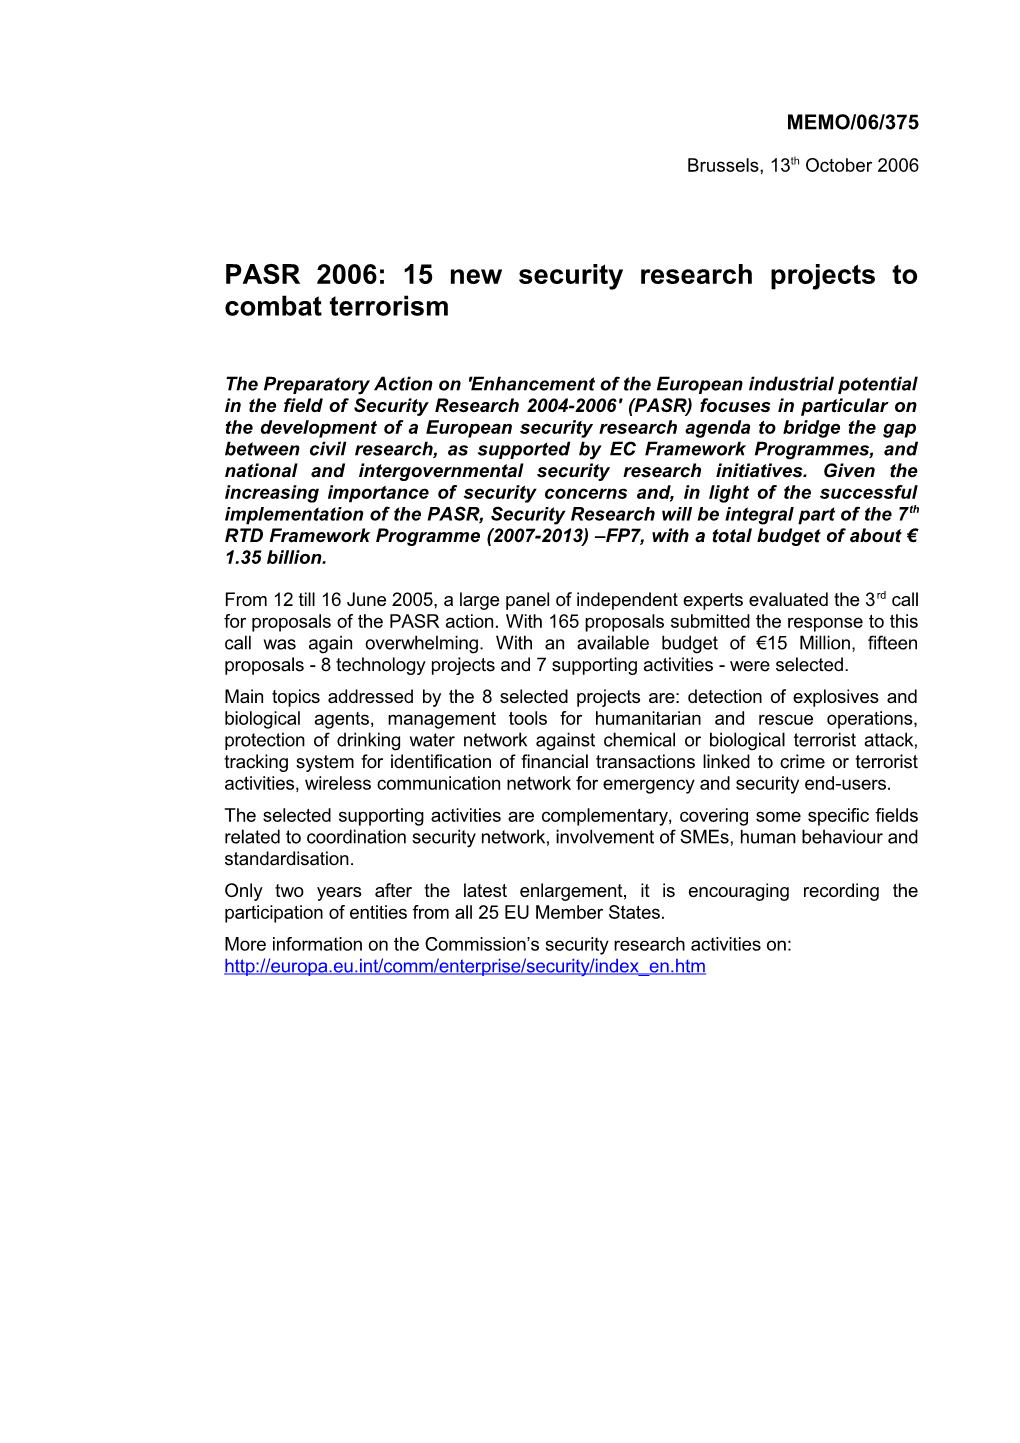 PASR 2006: 15 New Security Research Projects to Combat Terrorism